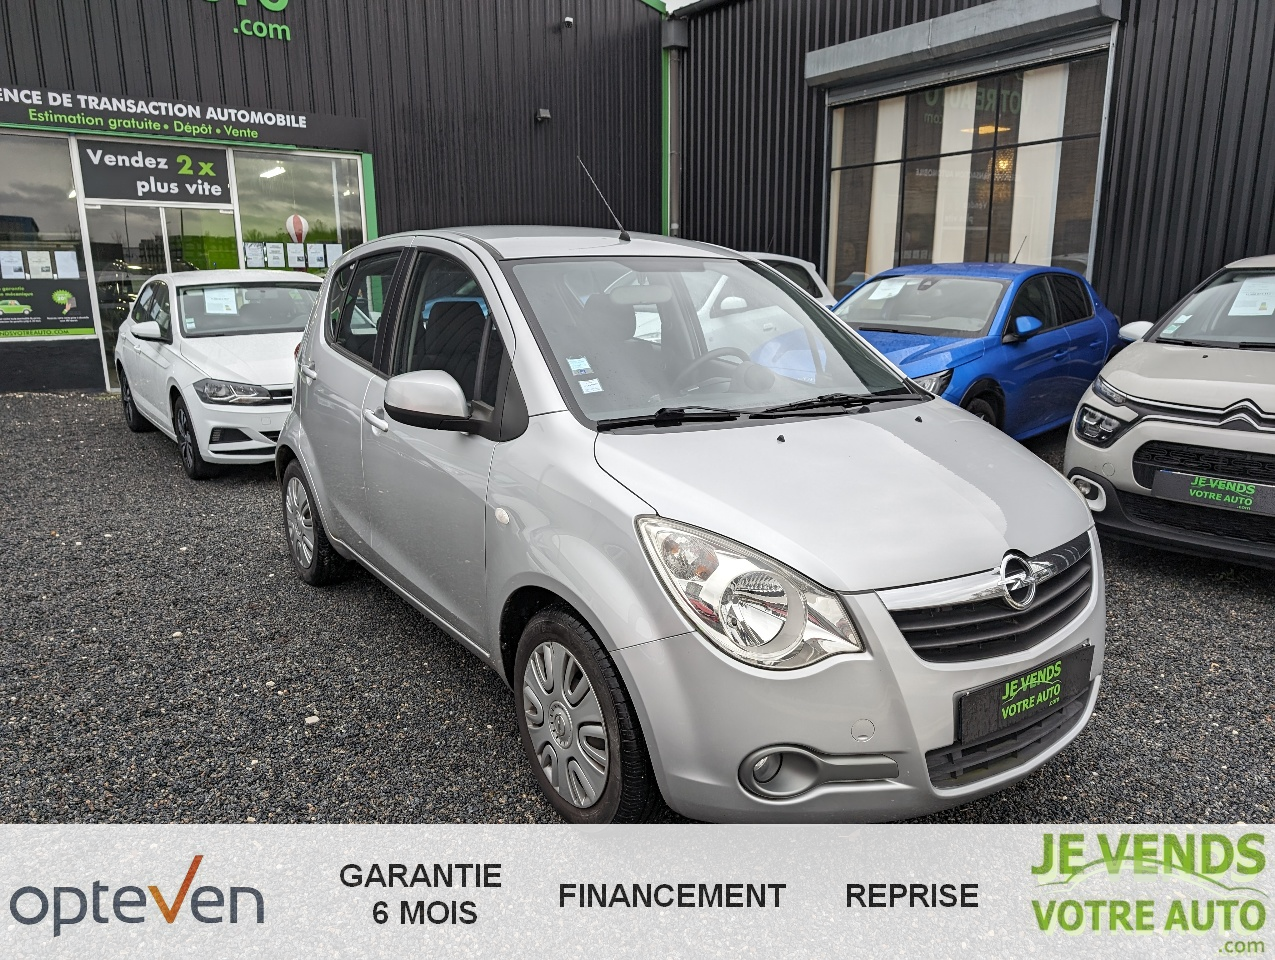 Voiture Opel occasion : annonces achat de véhicules Opel - page 103